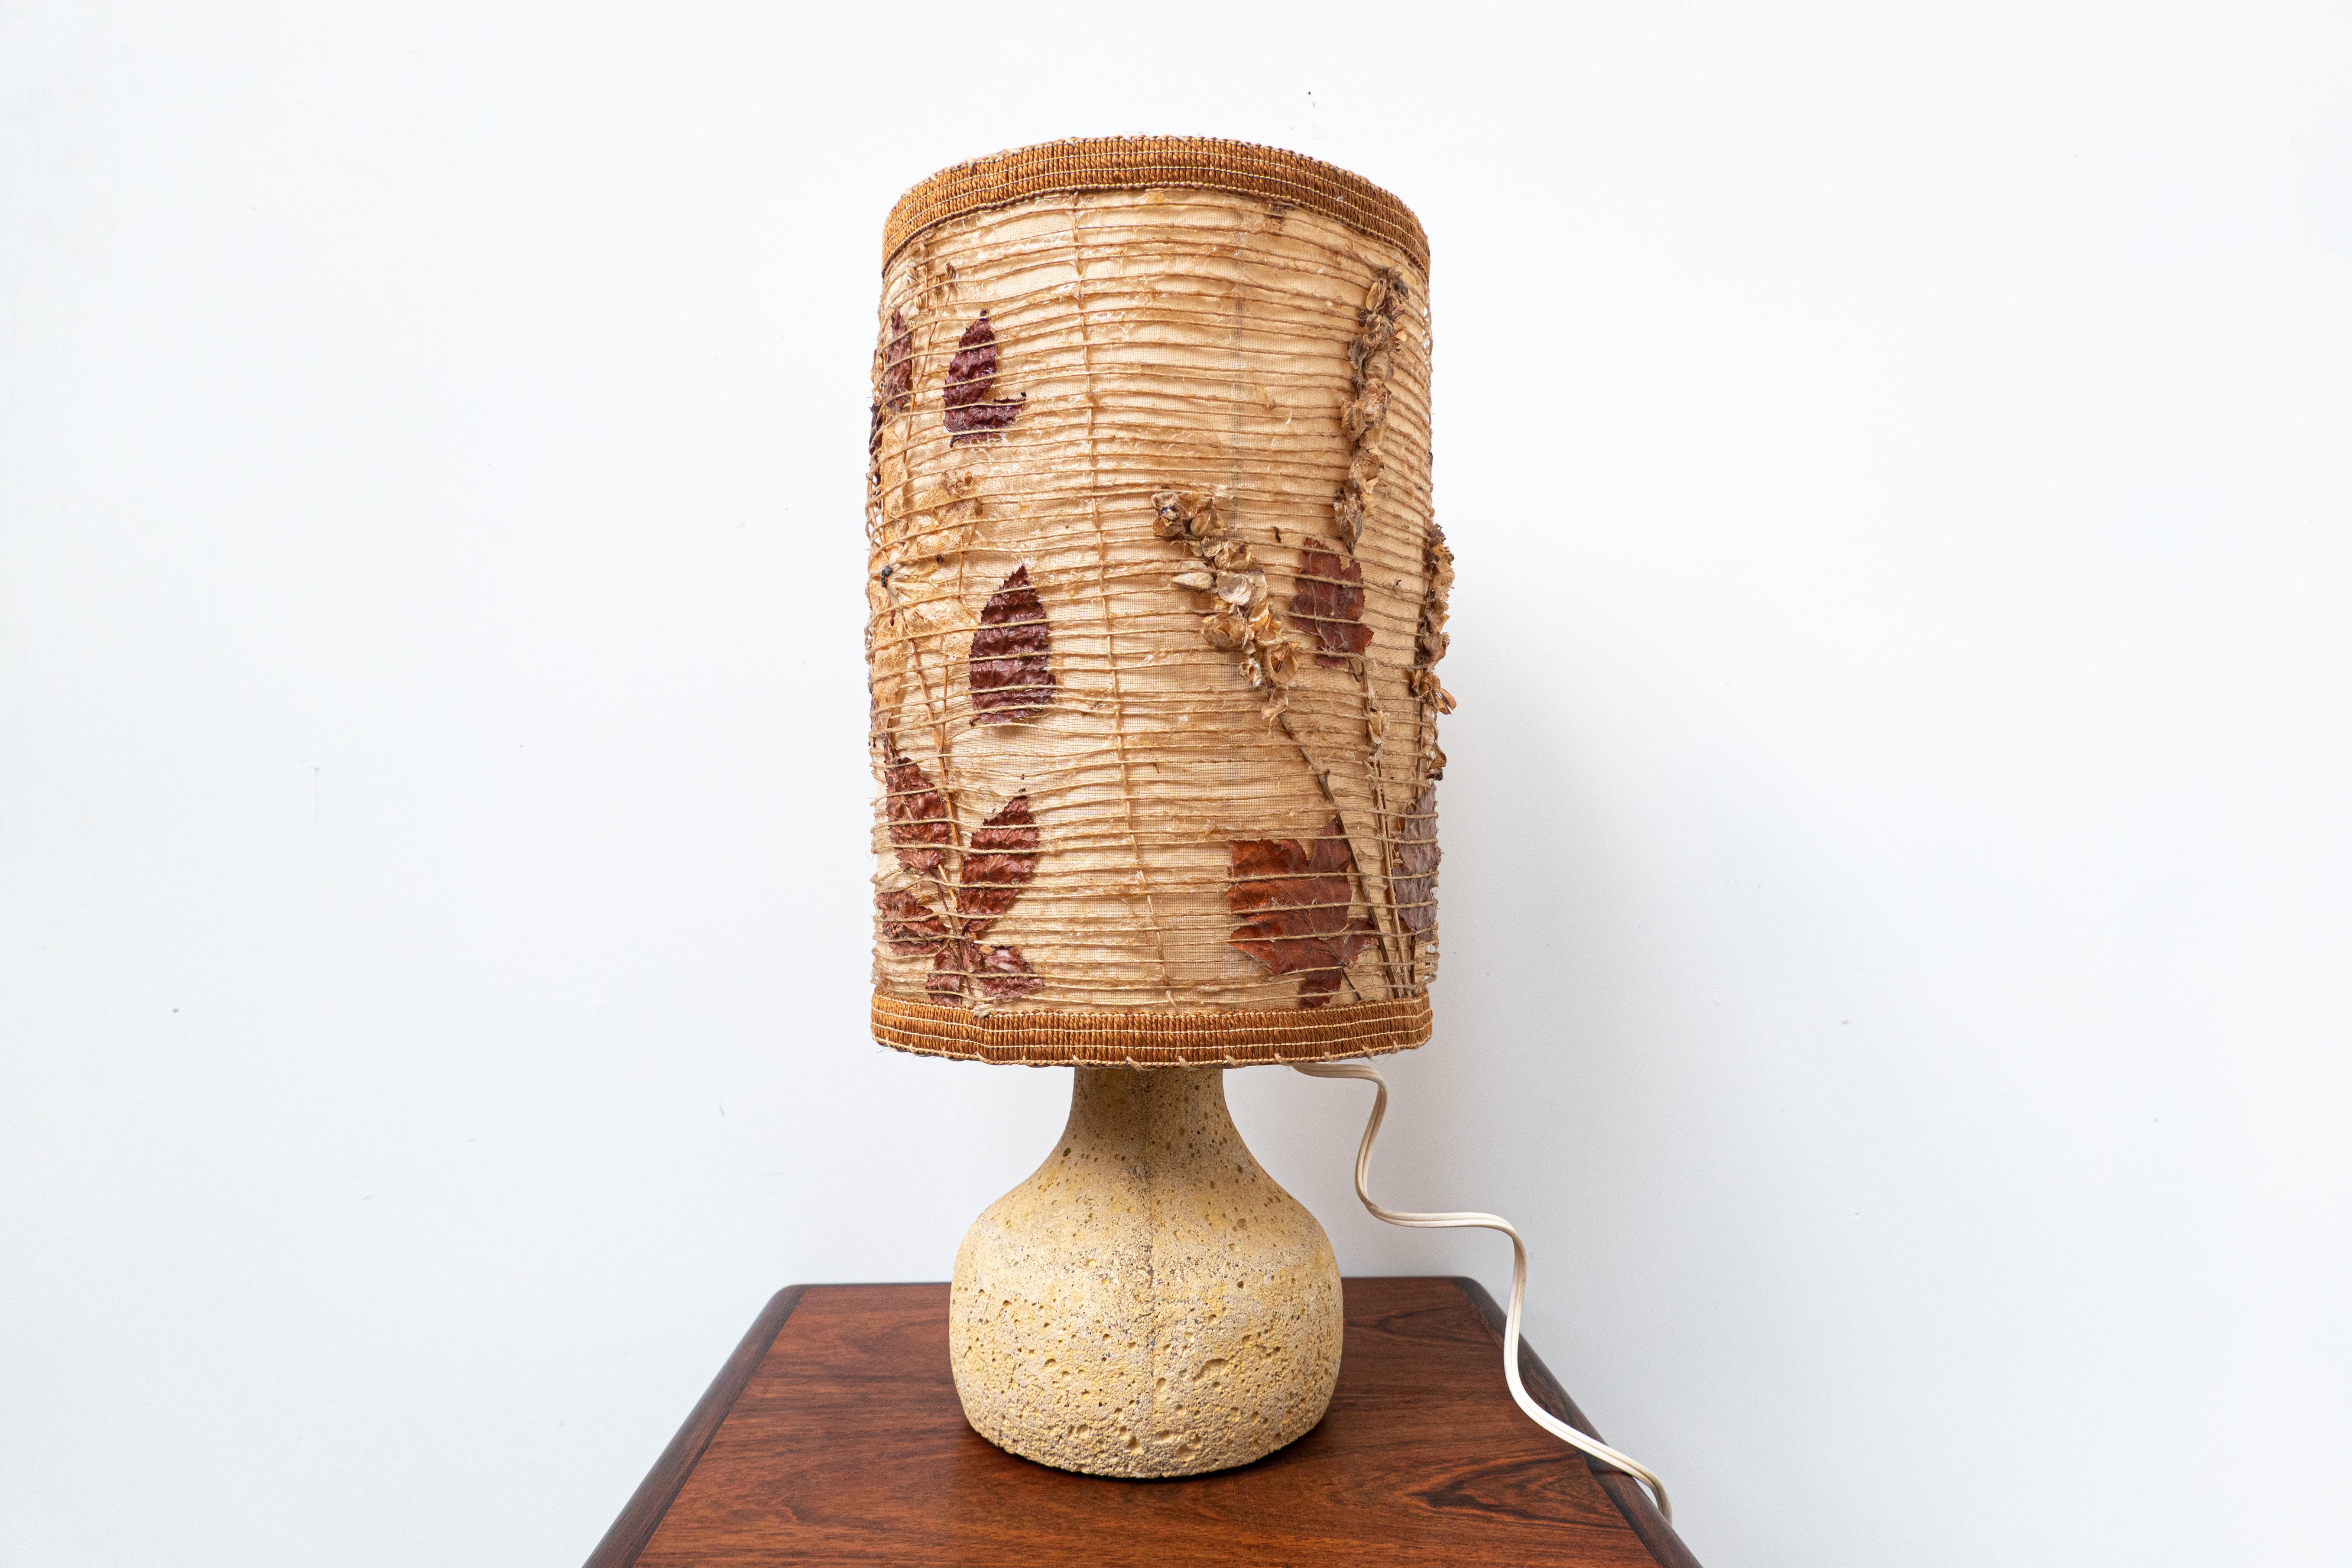 Mid-Century Modern travertine table lamp 1960s
The lampshade is orignal. Made of paper, leaves and rope.